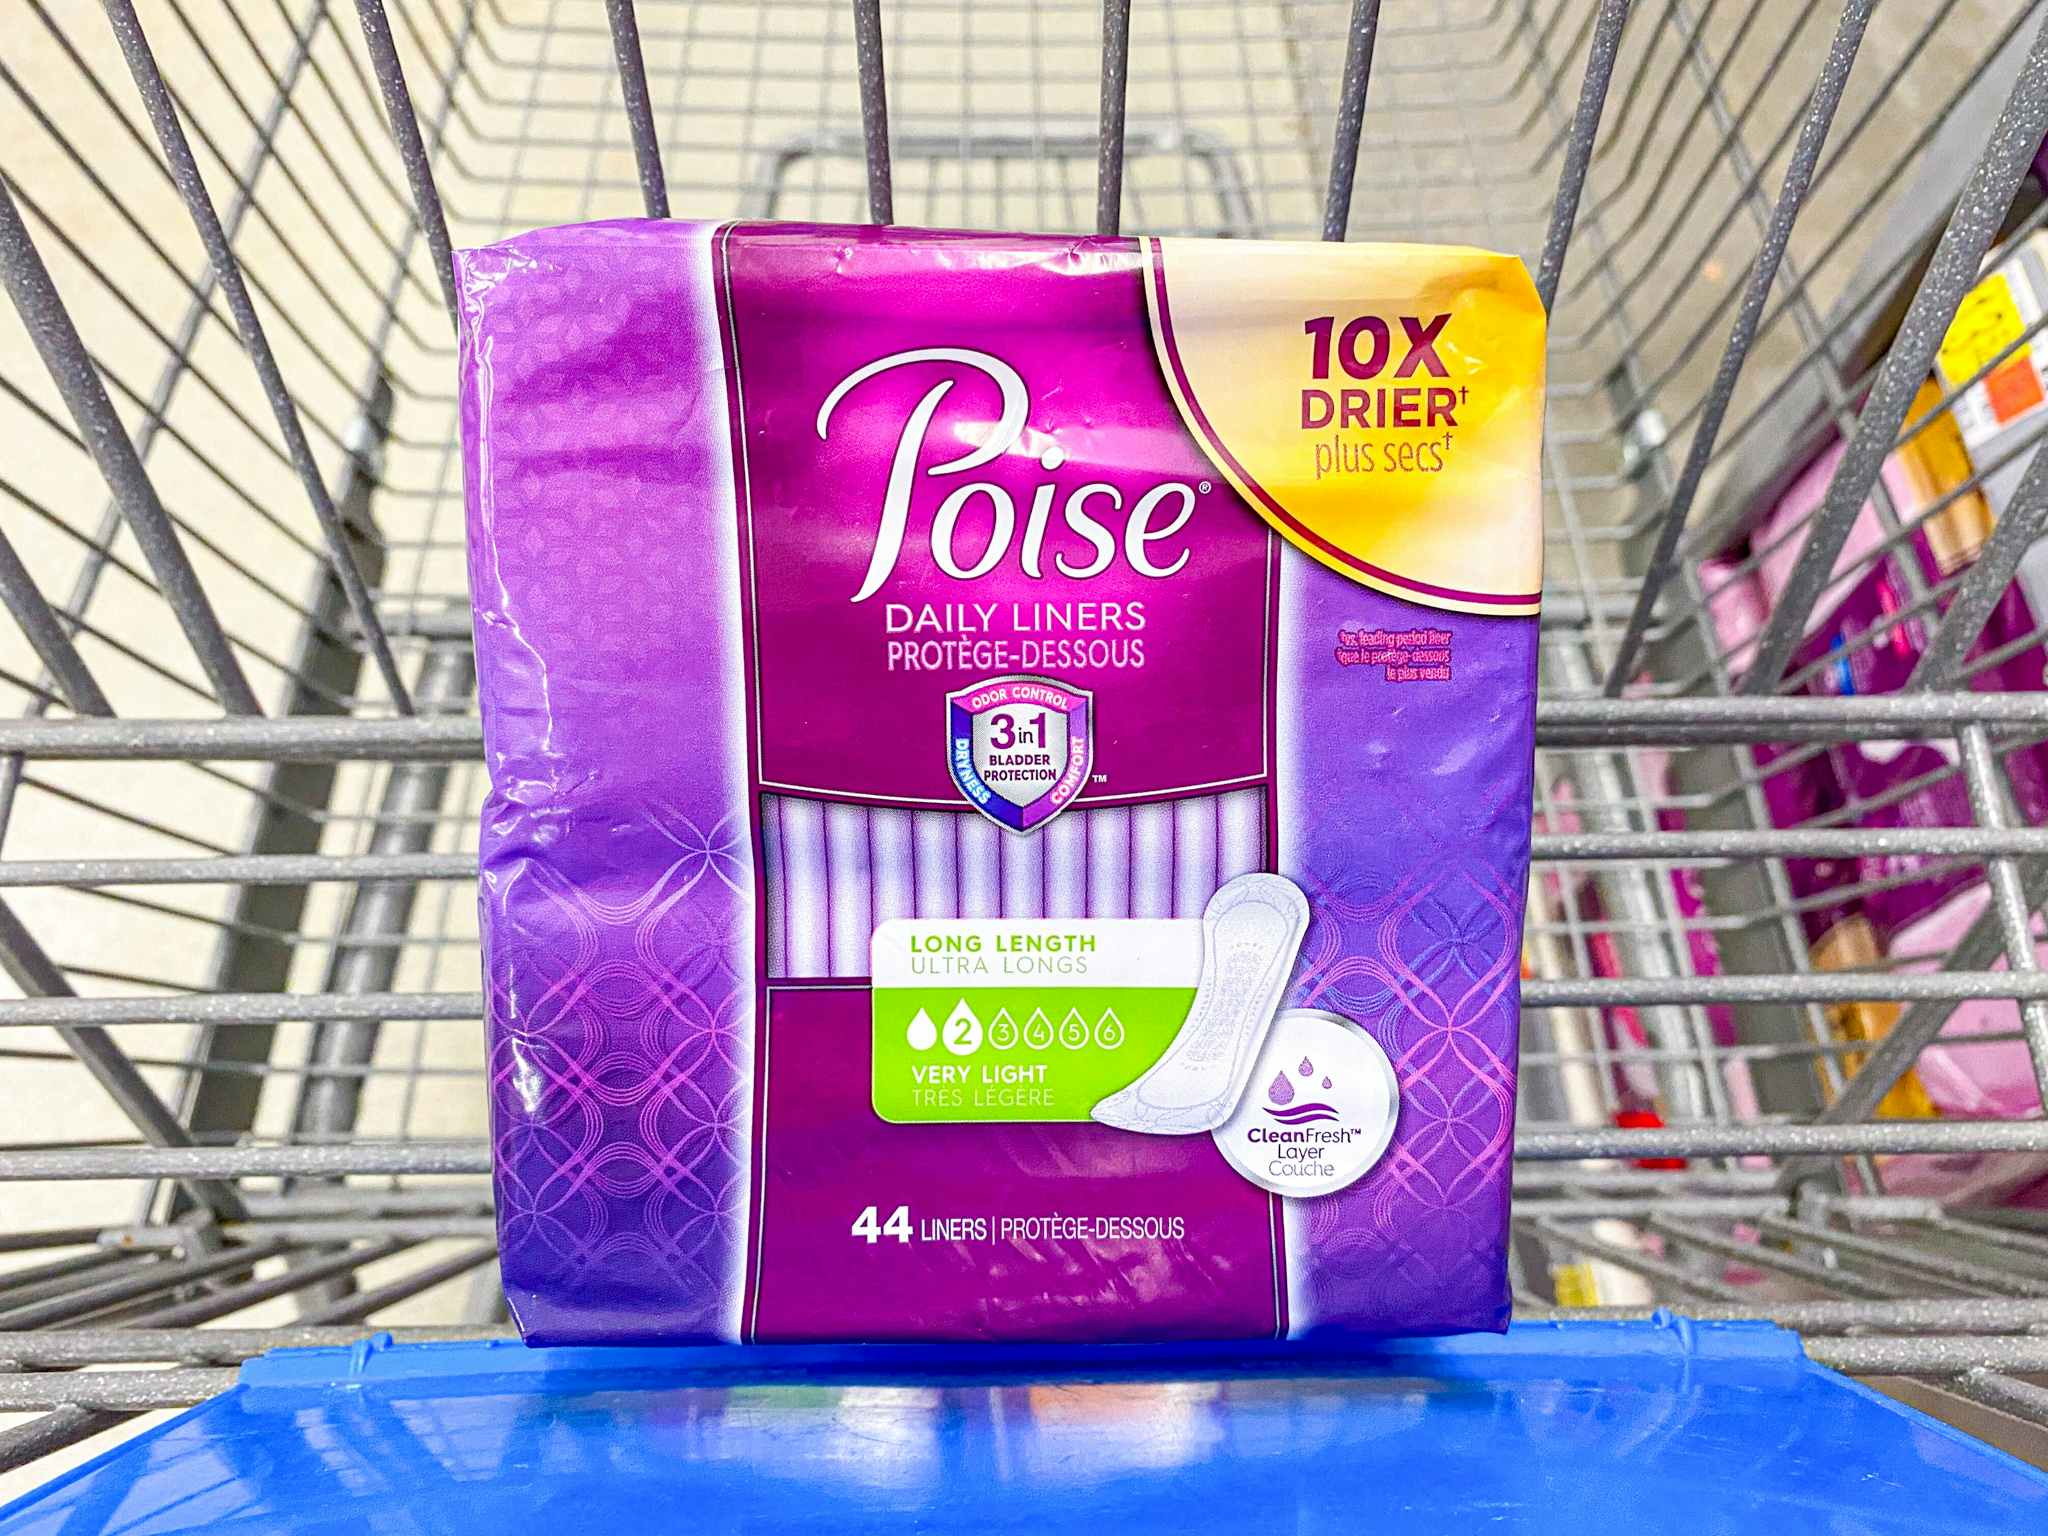 Poise Daily Liners 44-count package in Walmart shopping cart